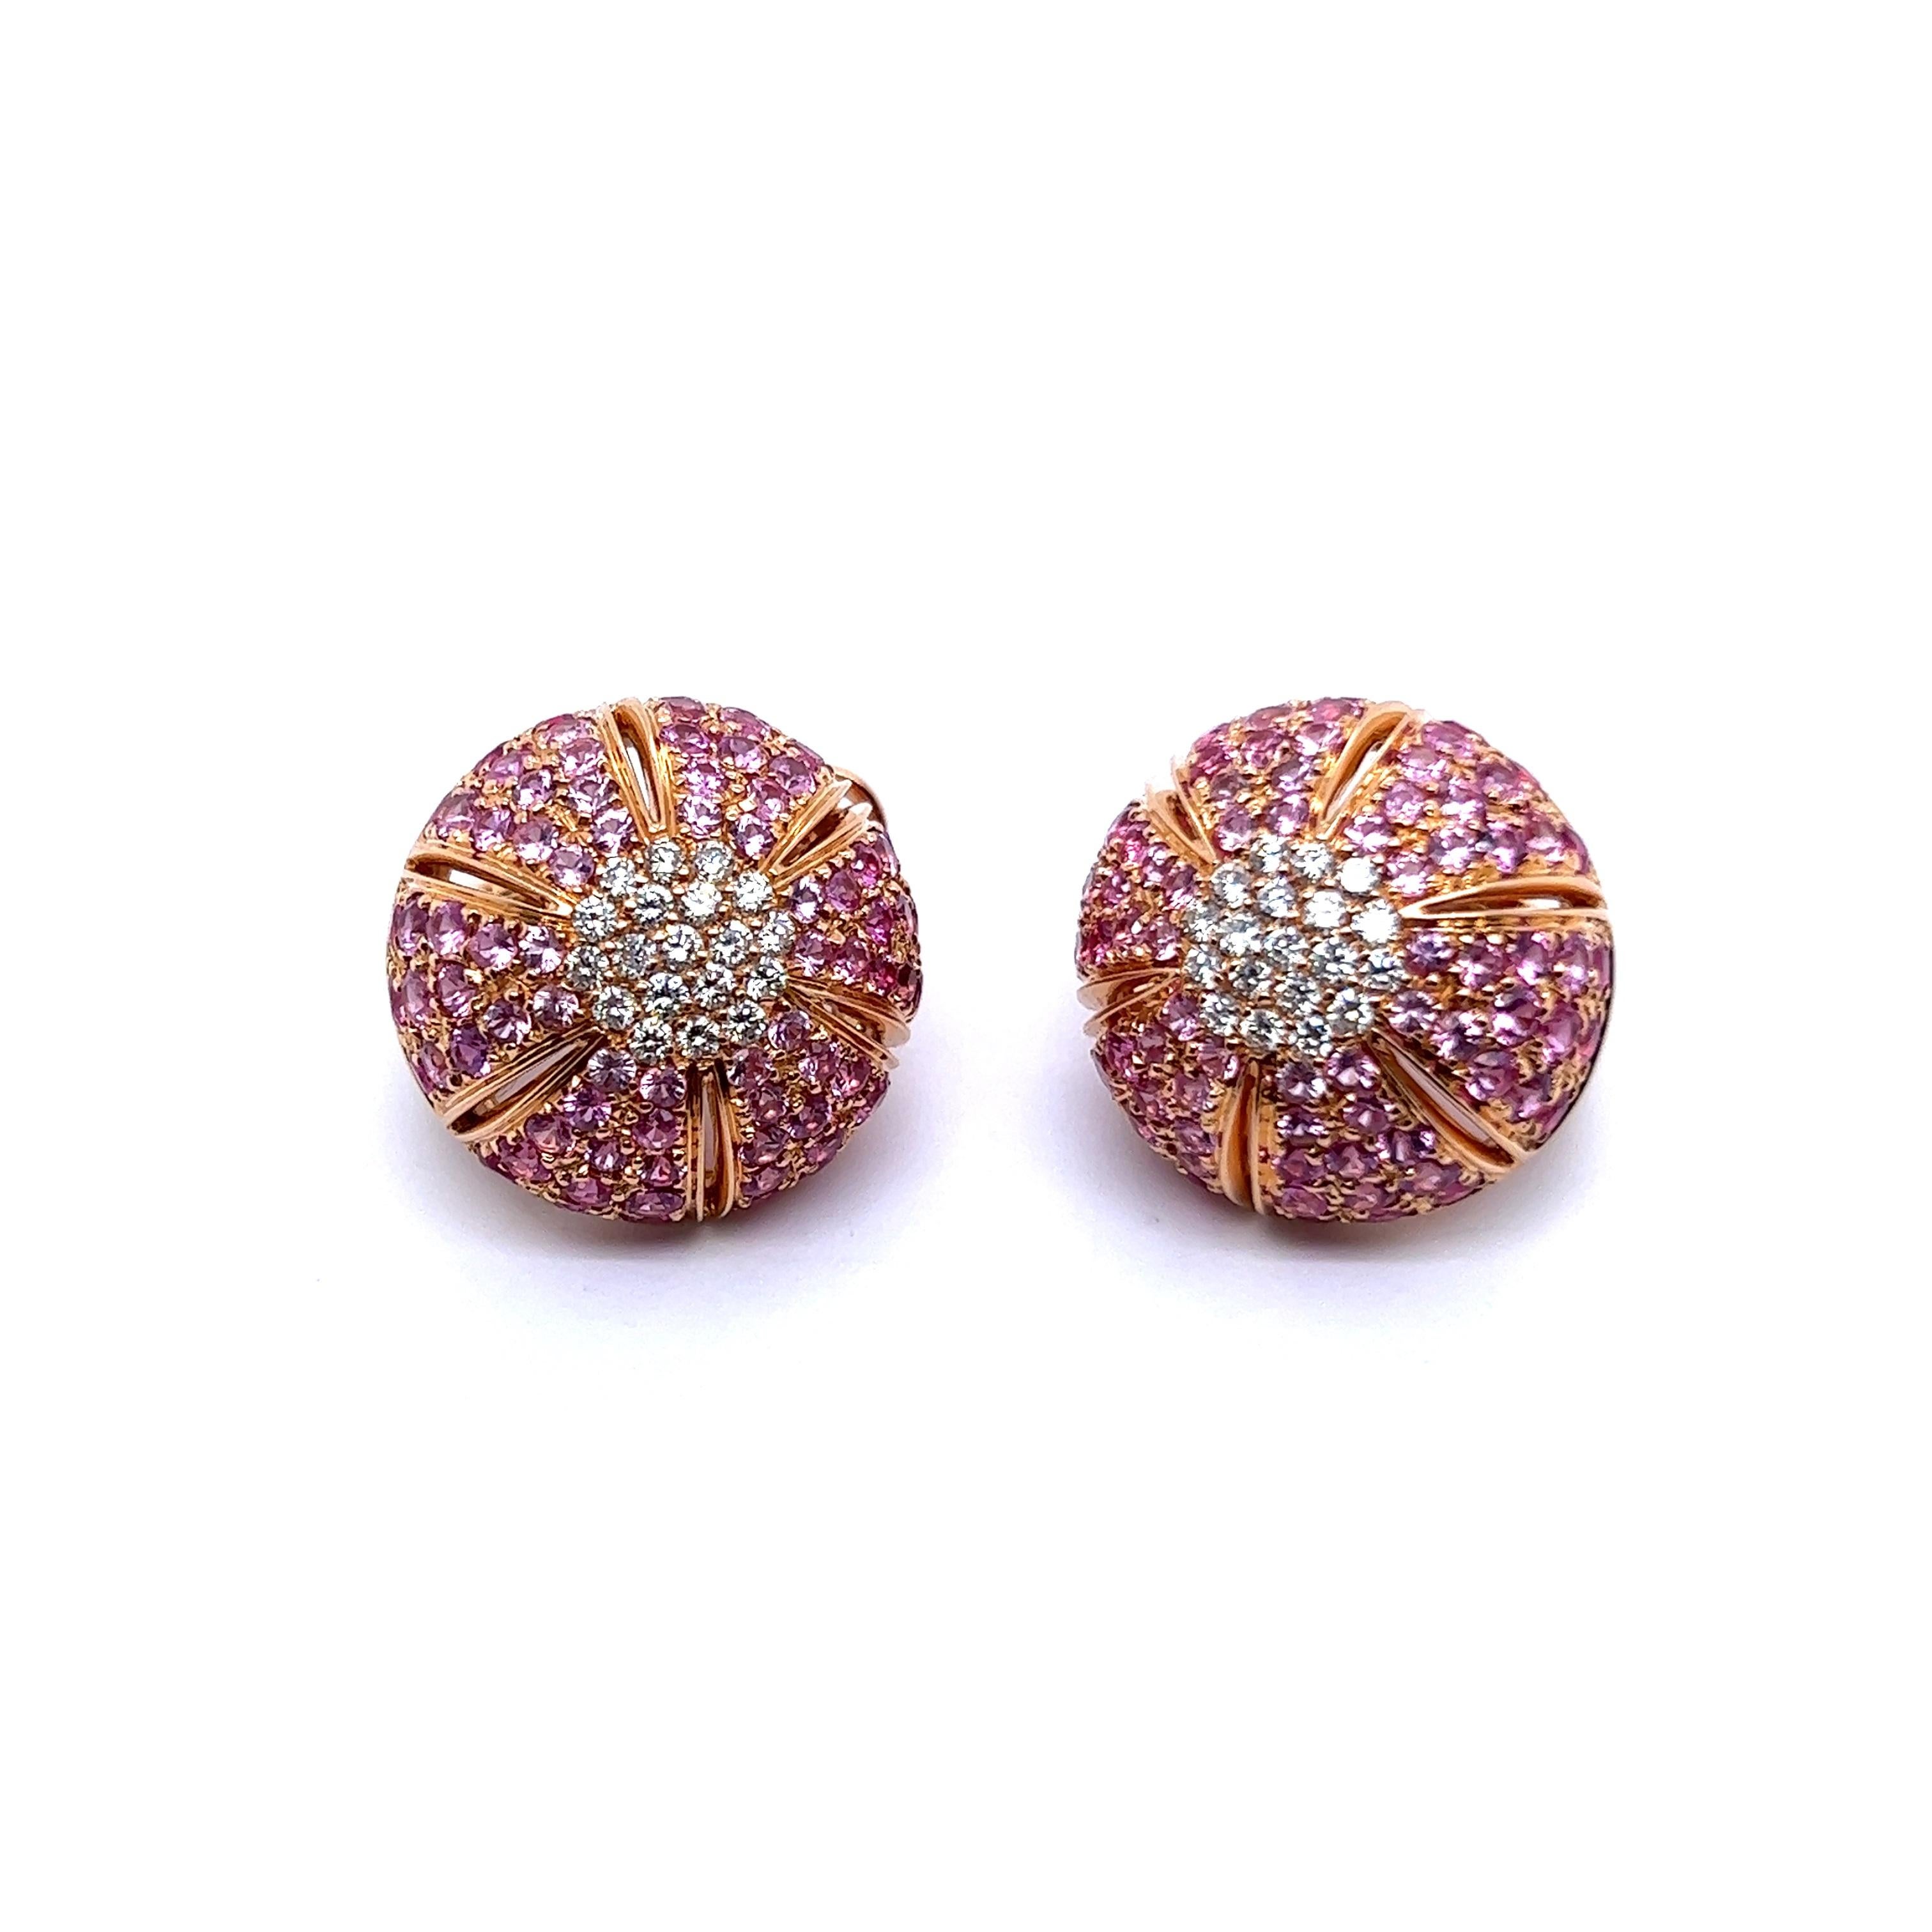 Earrings with Pink Sapphires & Diamonds in 18 Karat Rose Gold by Damiani 1